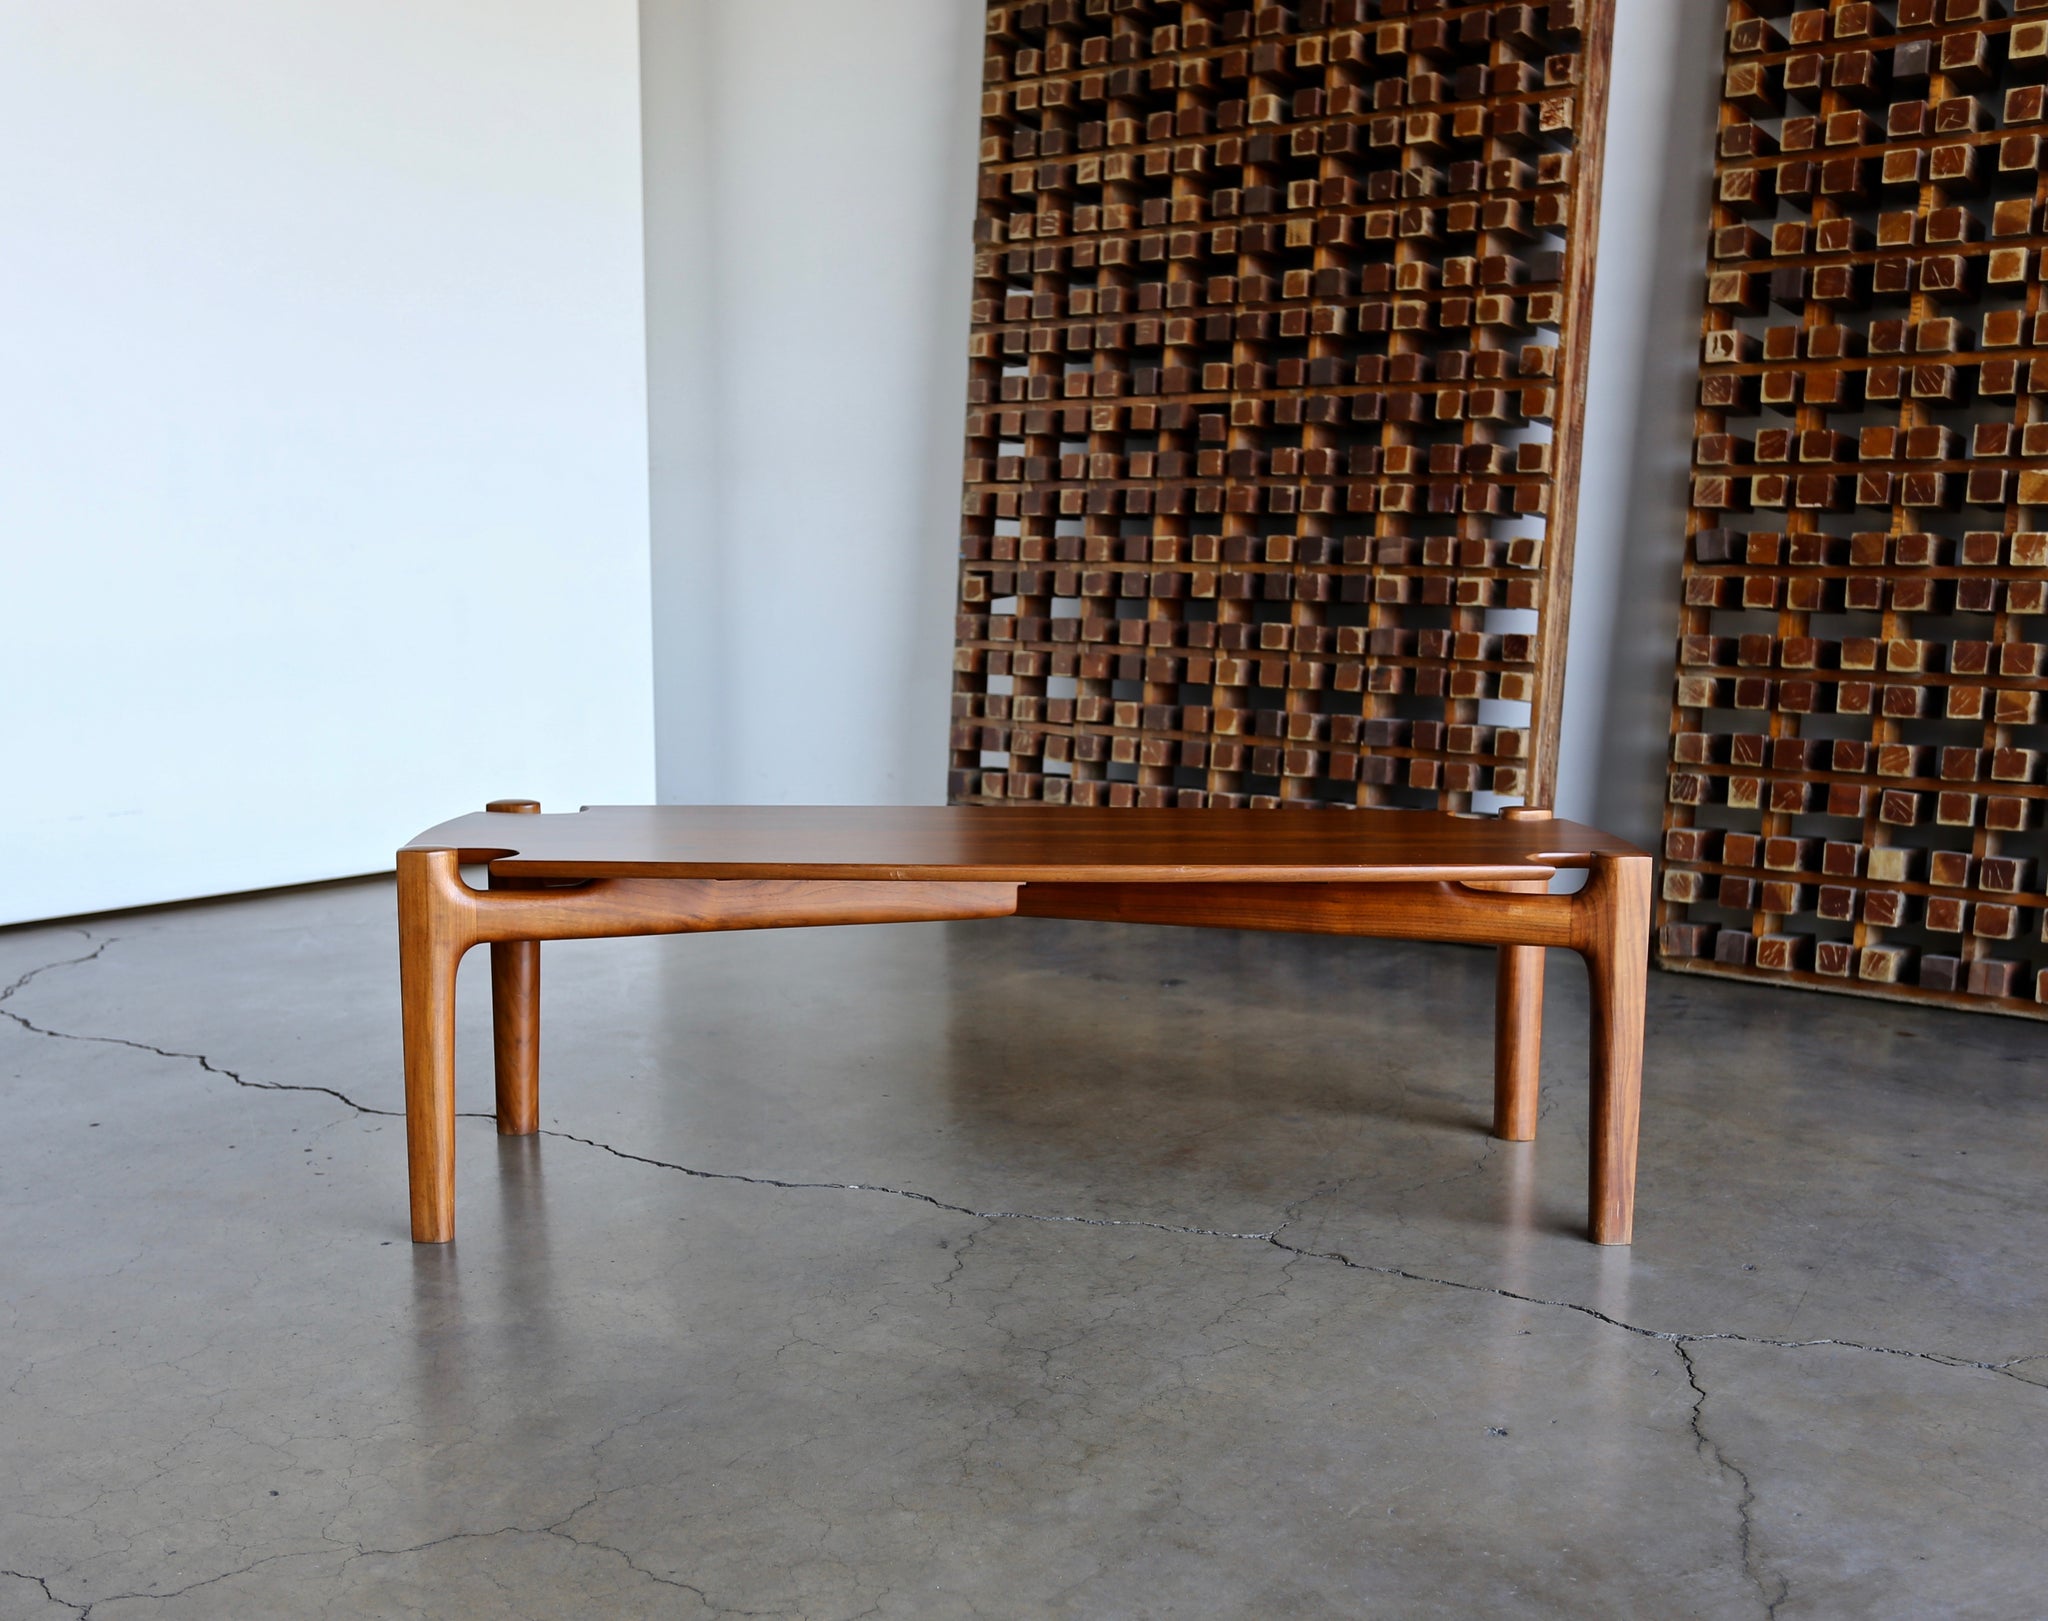 = SOLD = Bud Tullis Handcrafted Coffee Table, 1978